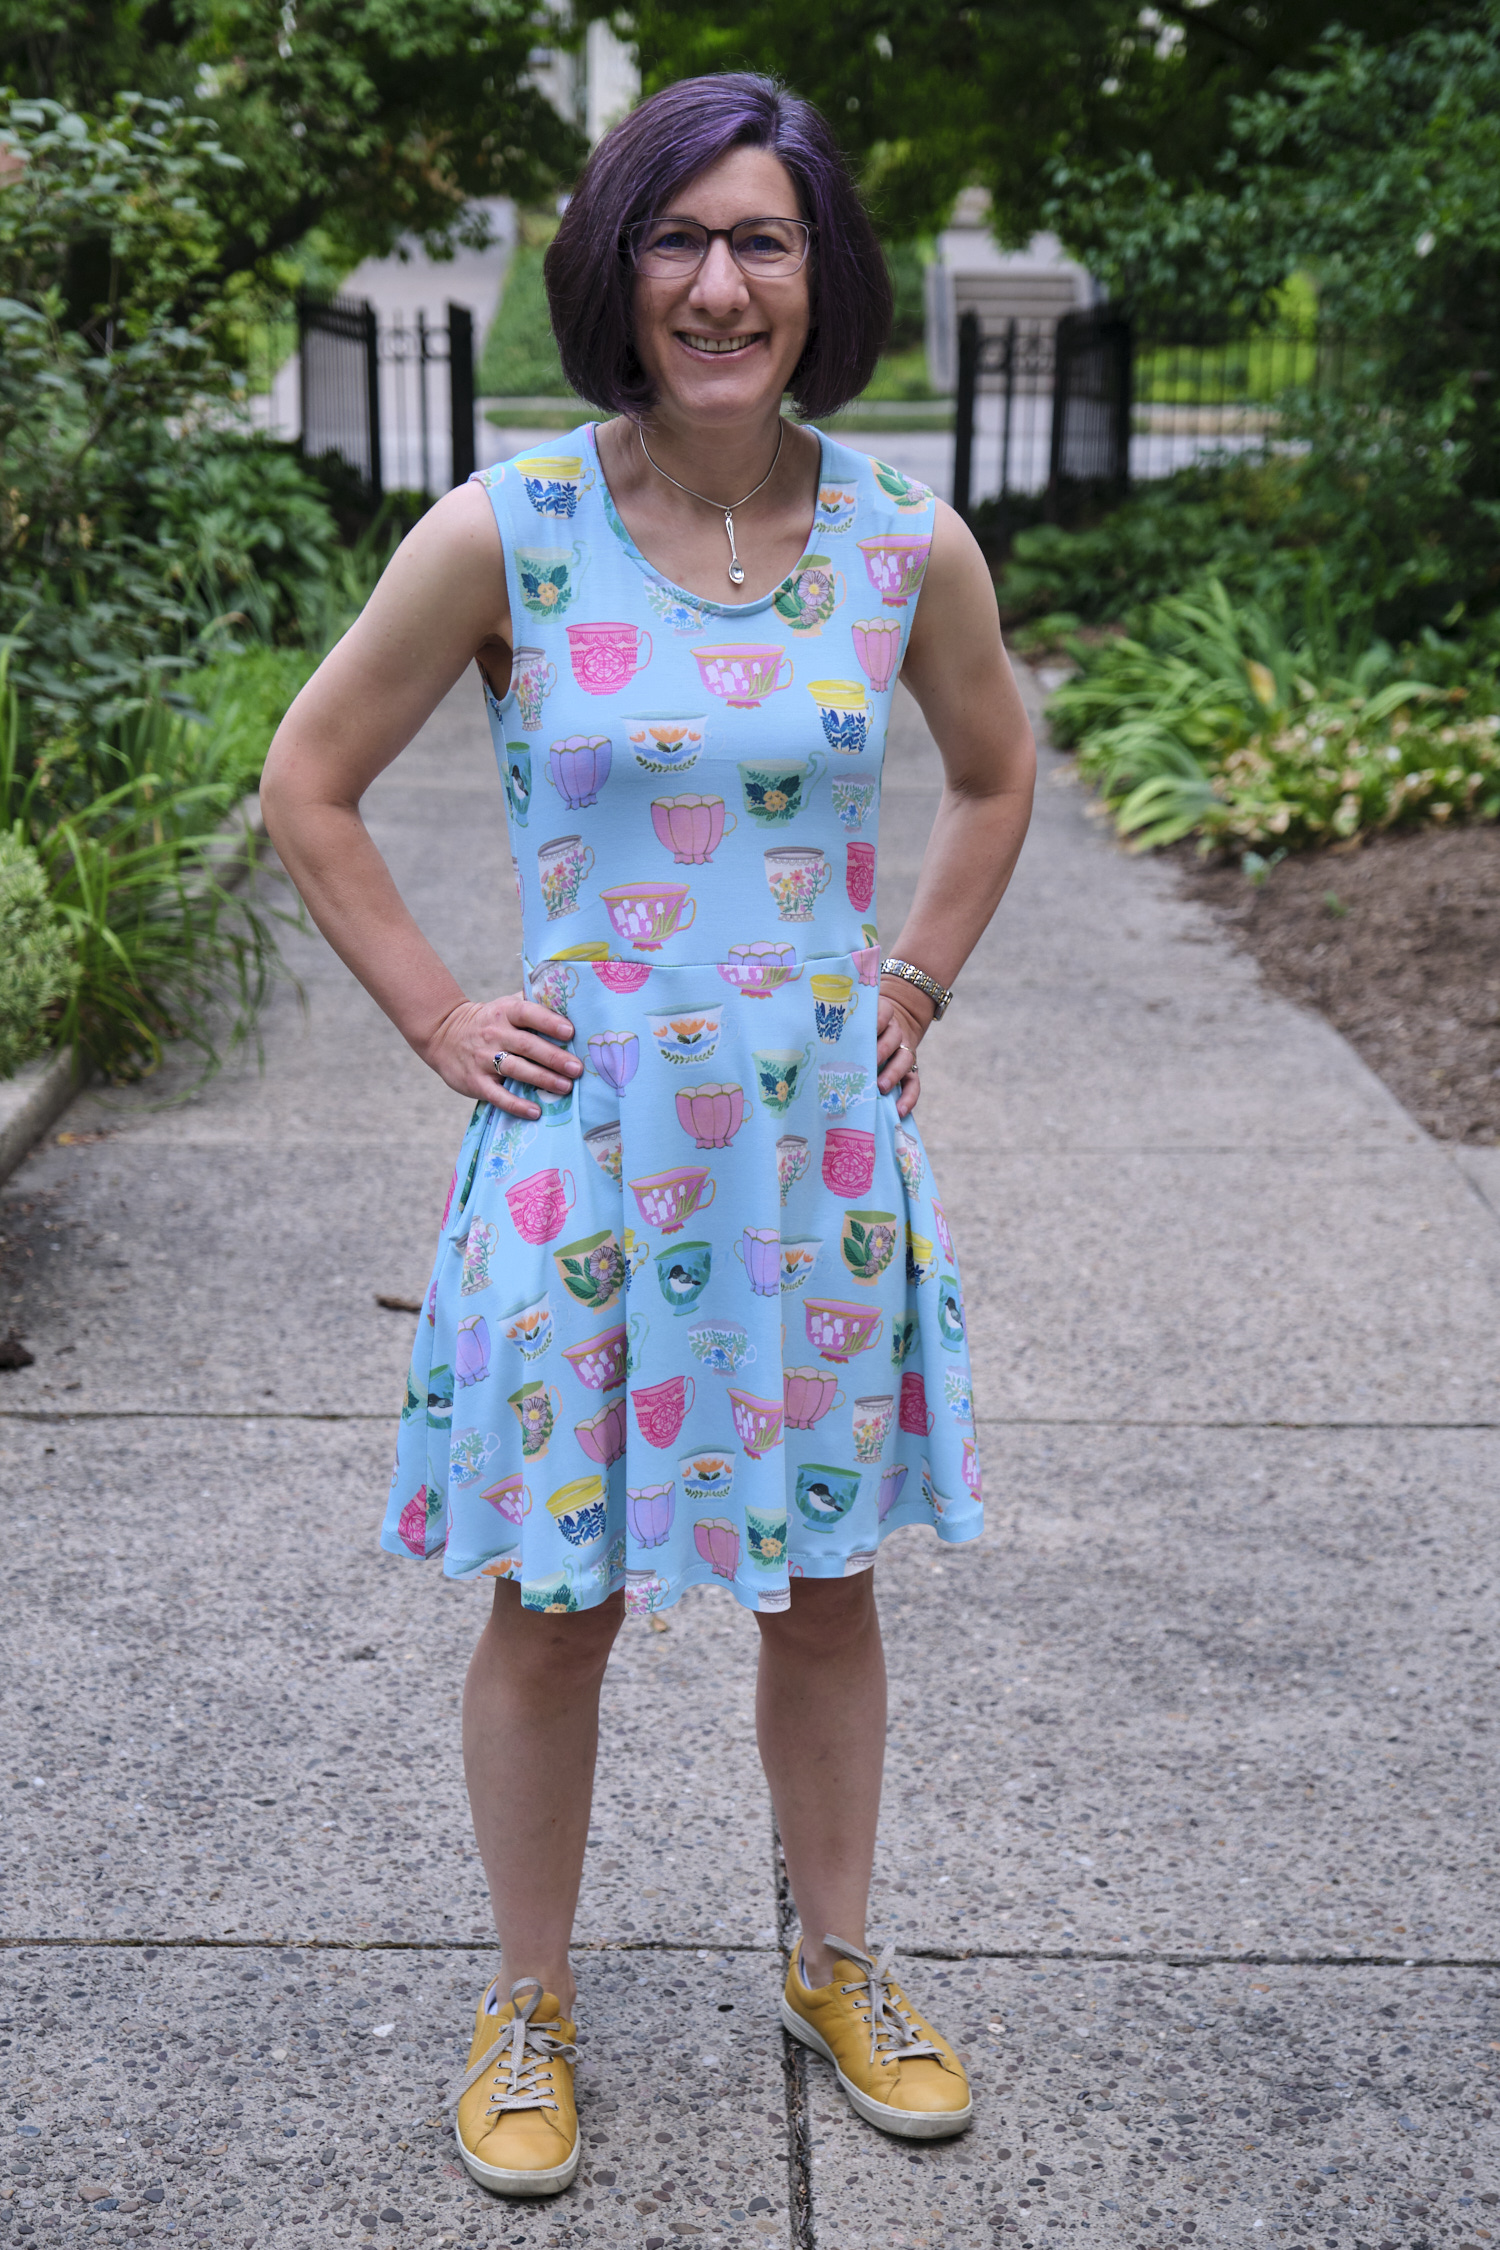 Sinclair Patterns - Kids Blueberry Tee Review - The Nerdy Sewist Loves Pizza